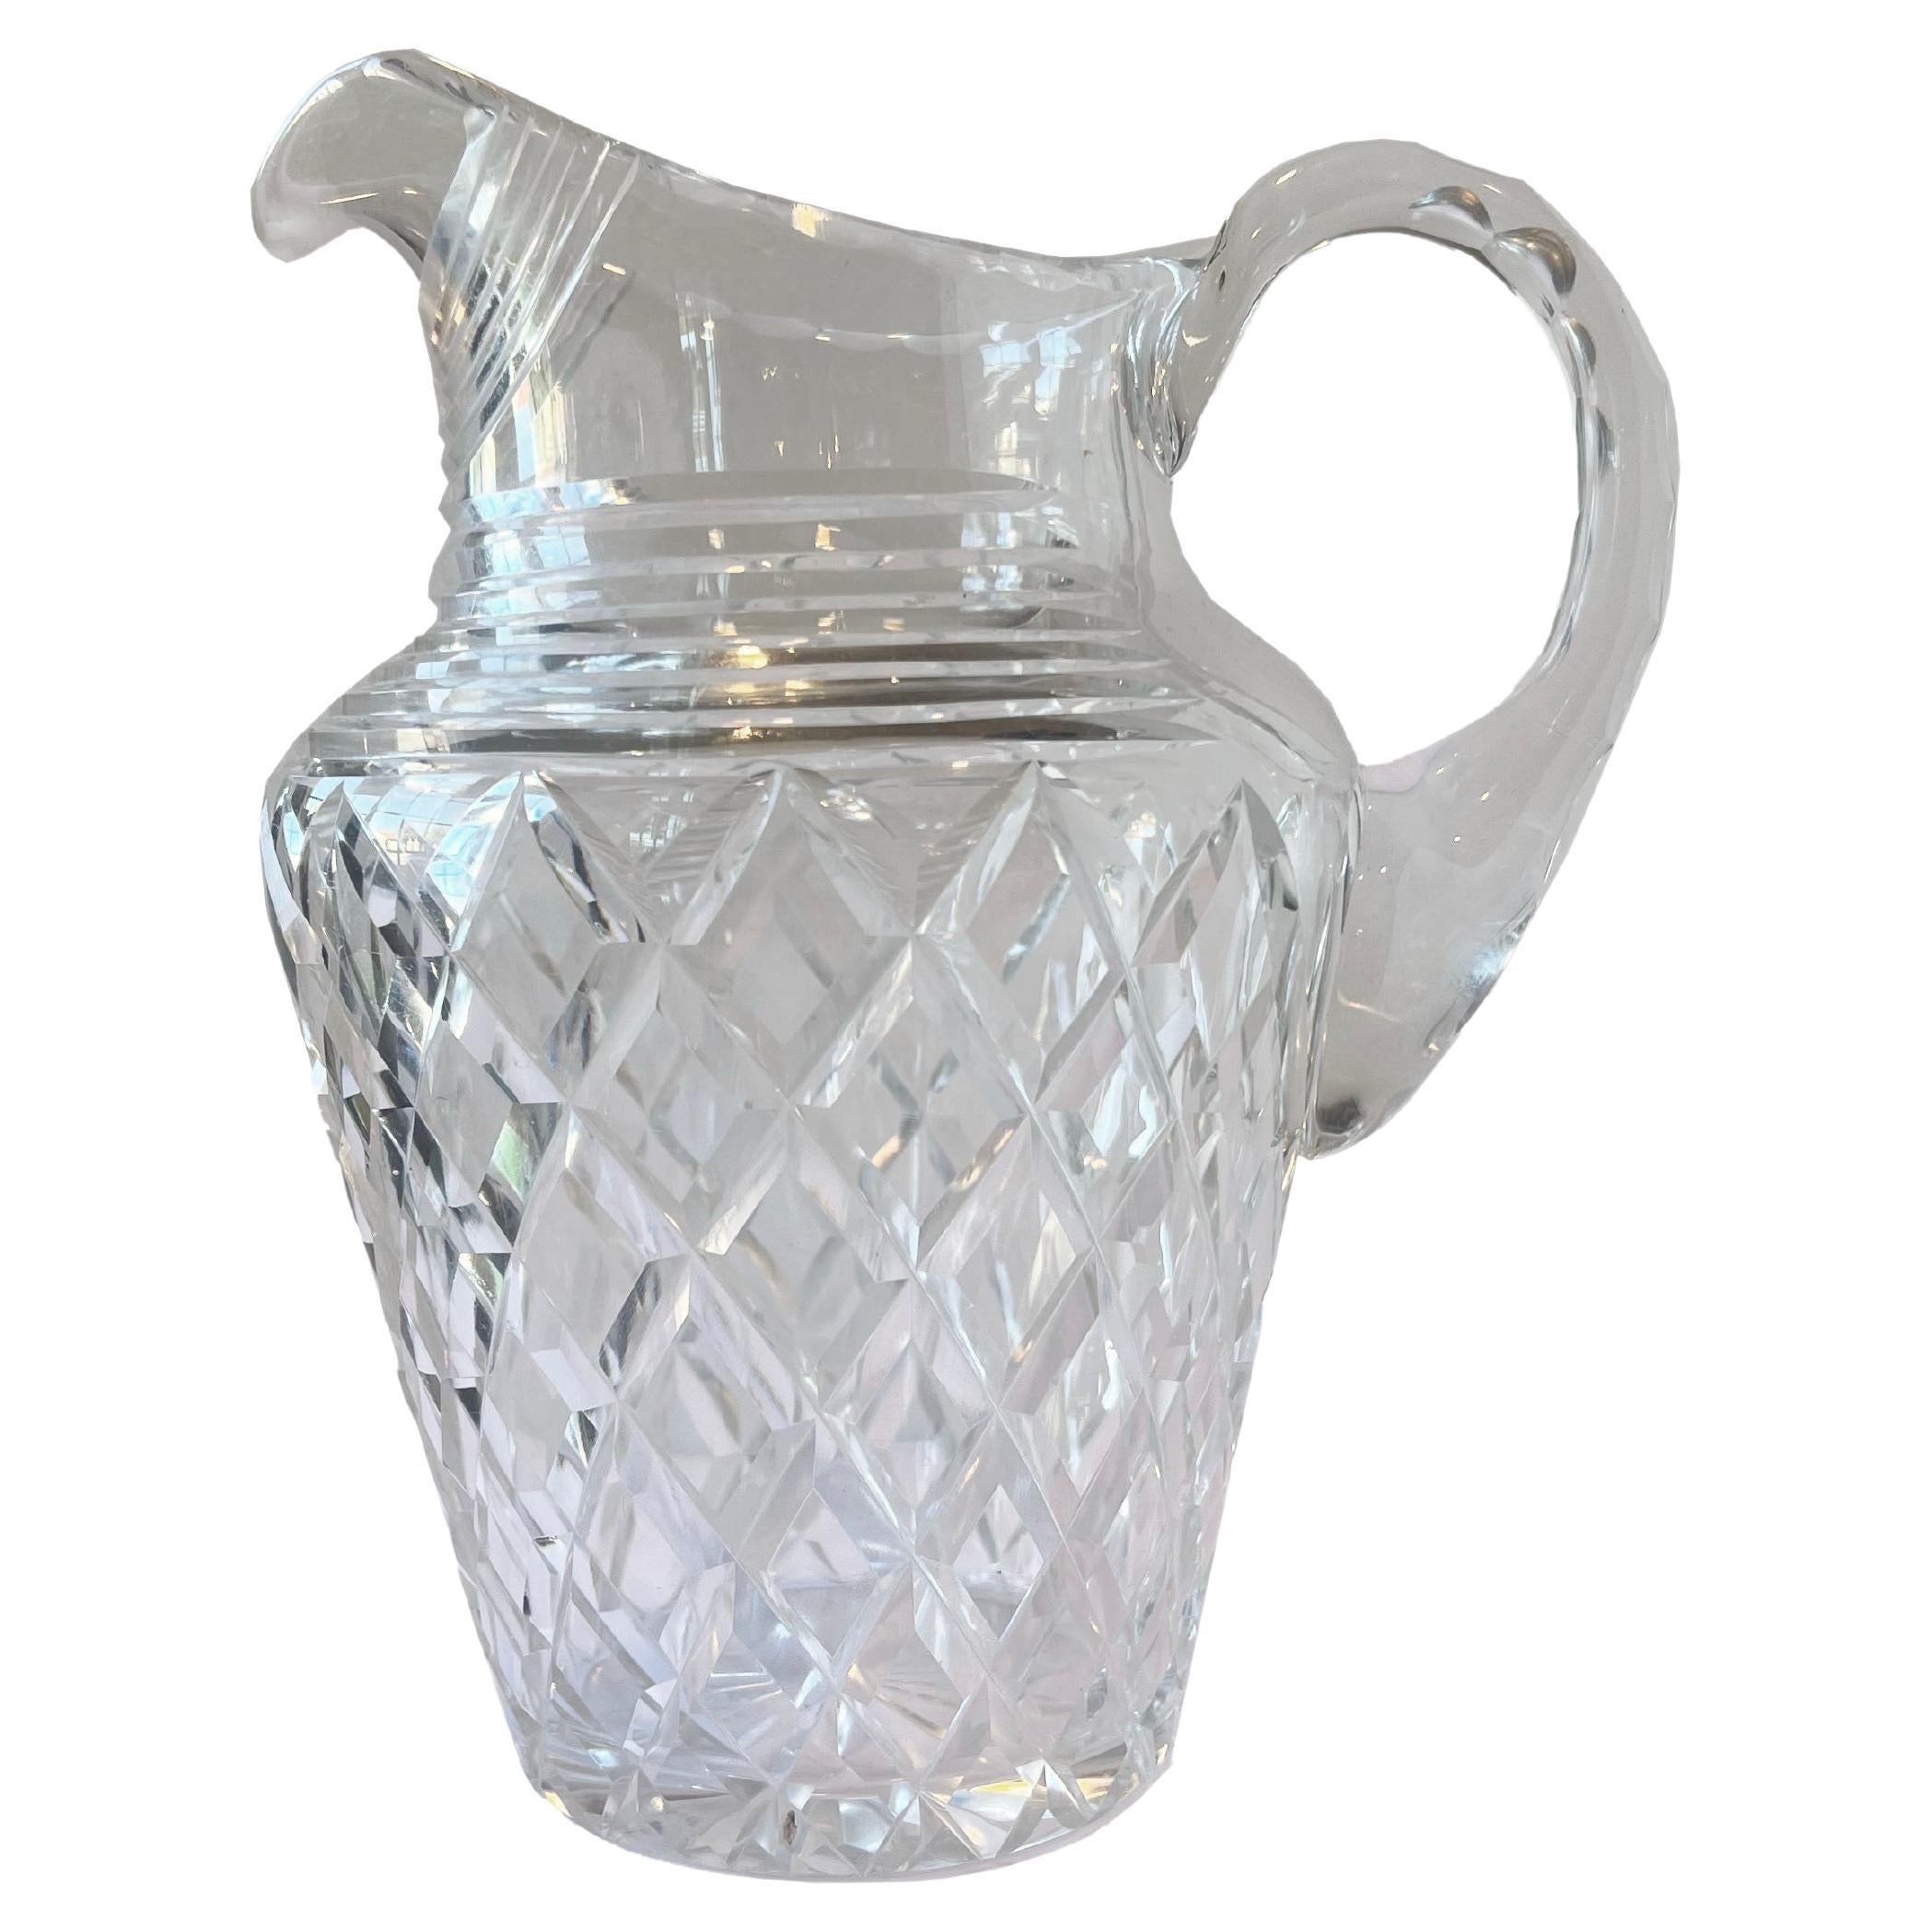 Faceted Crystal Pitcher from Andre Leon Talley's Private Collection